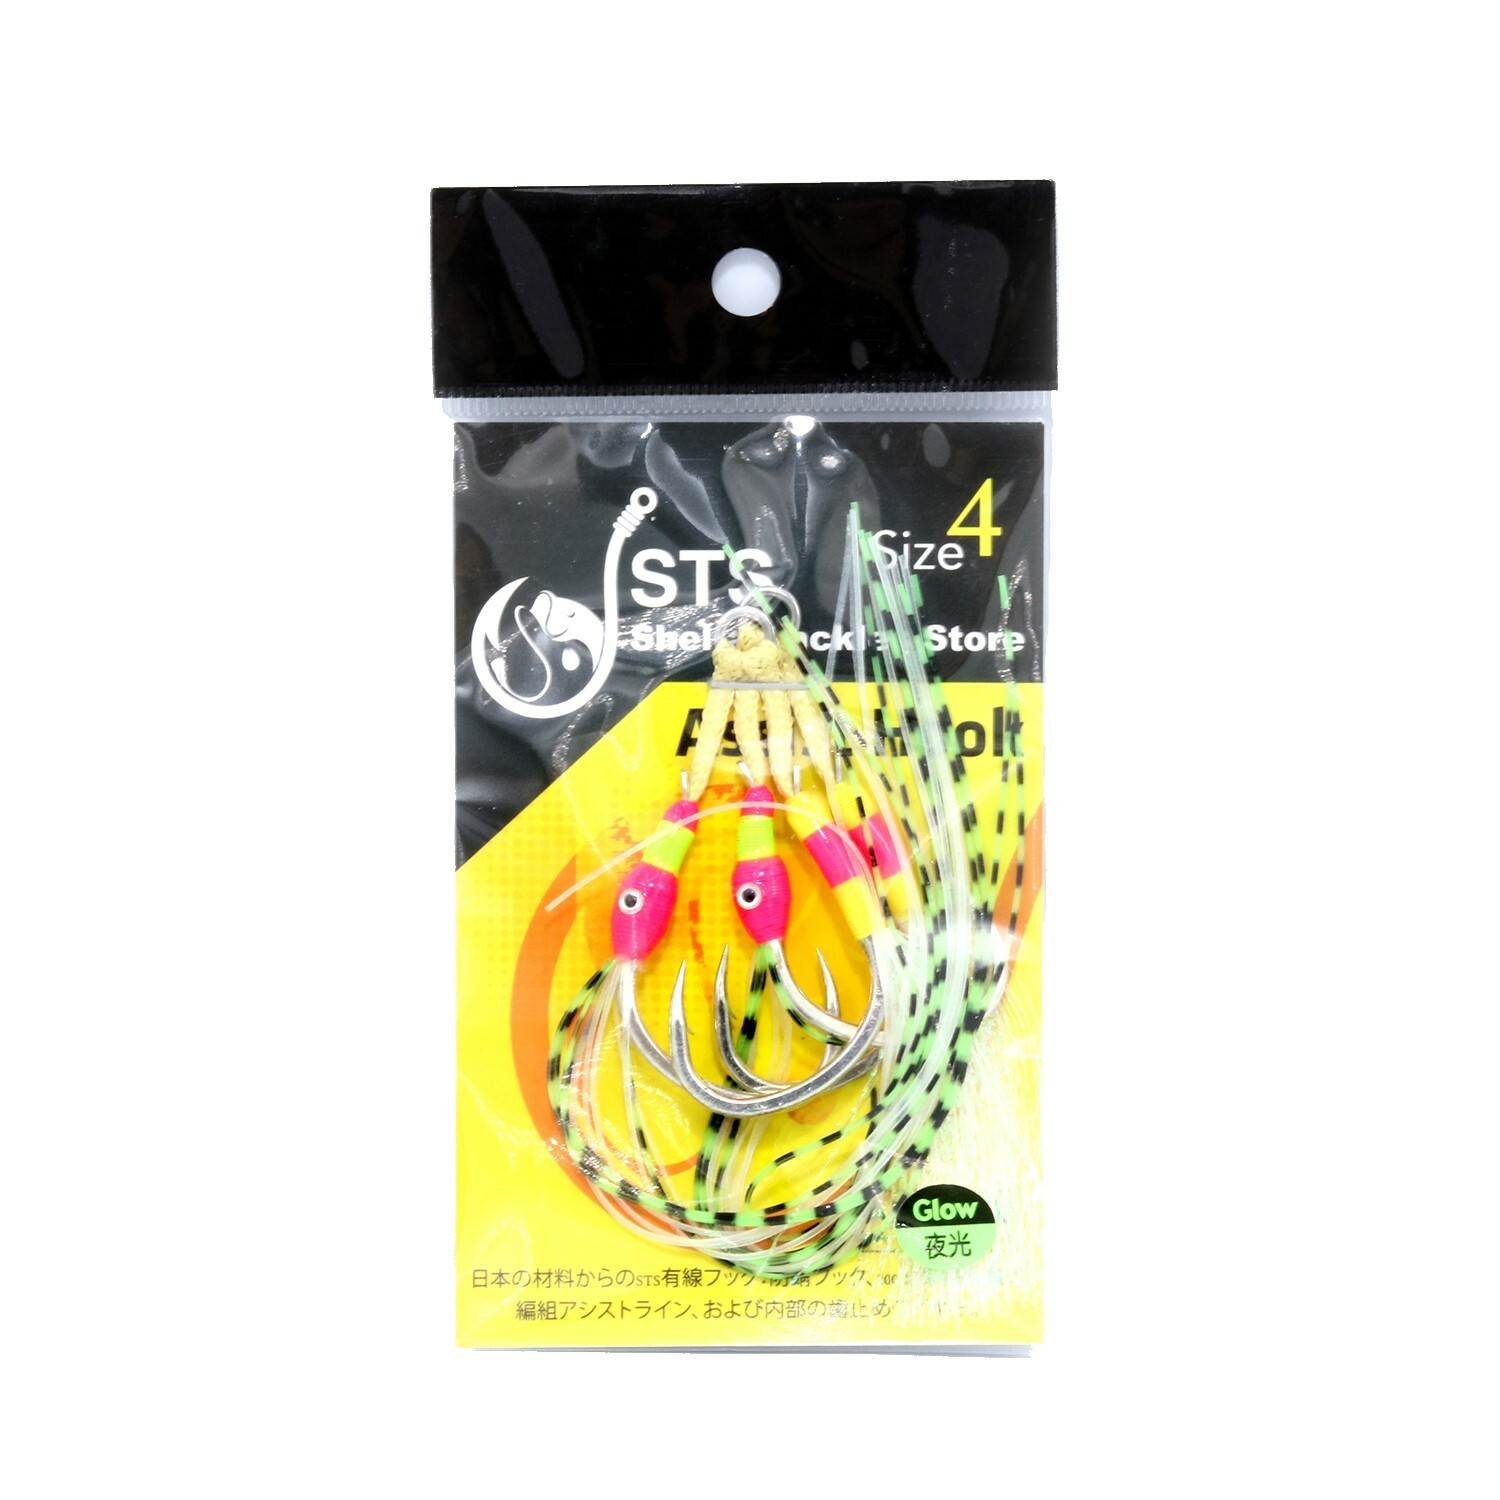 STS - Diva Jig 125G - Pink & Yellow